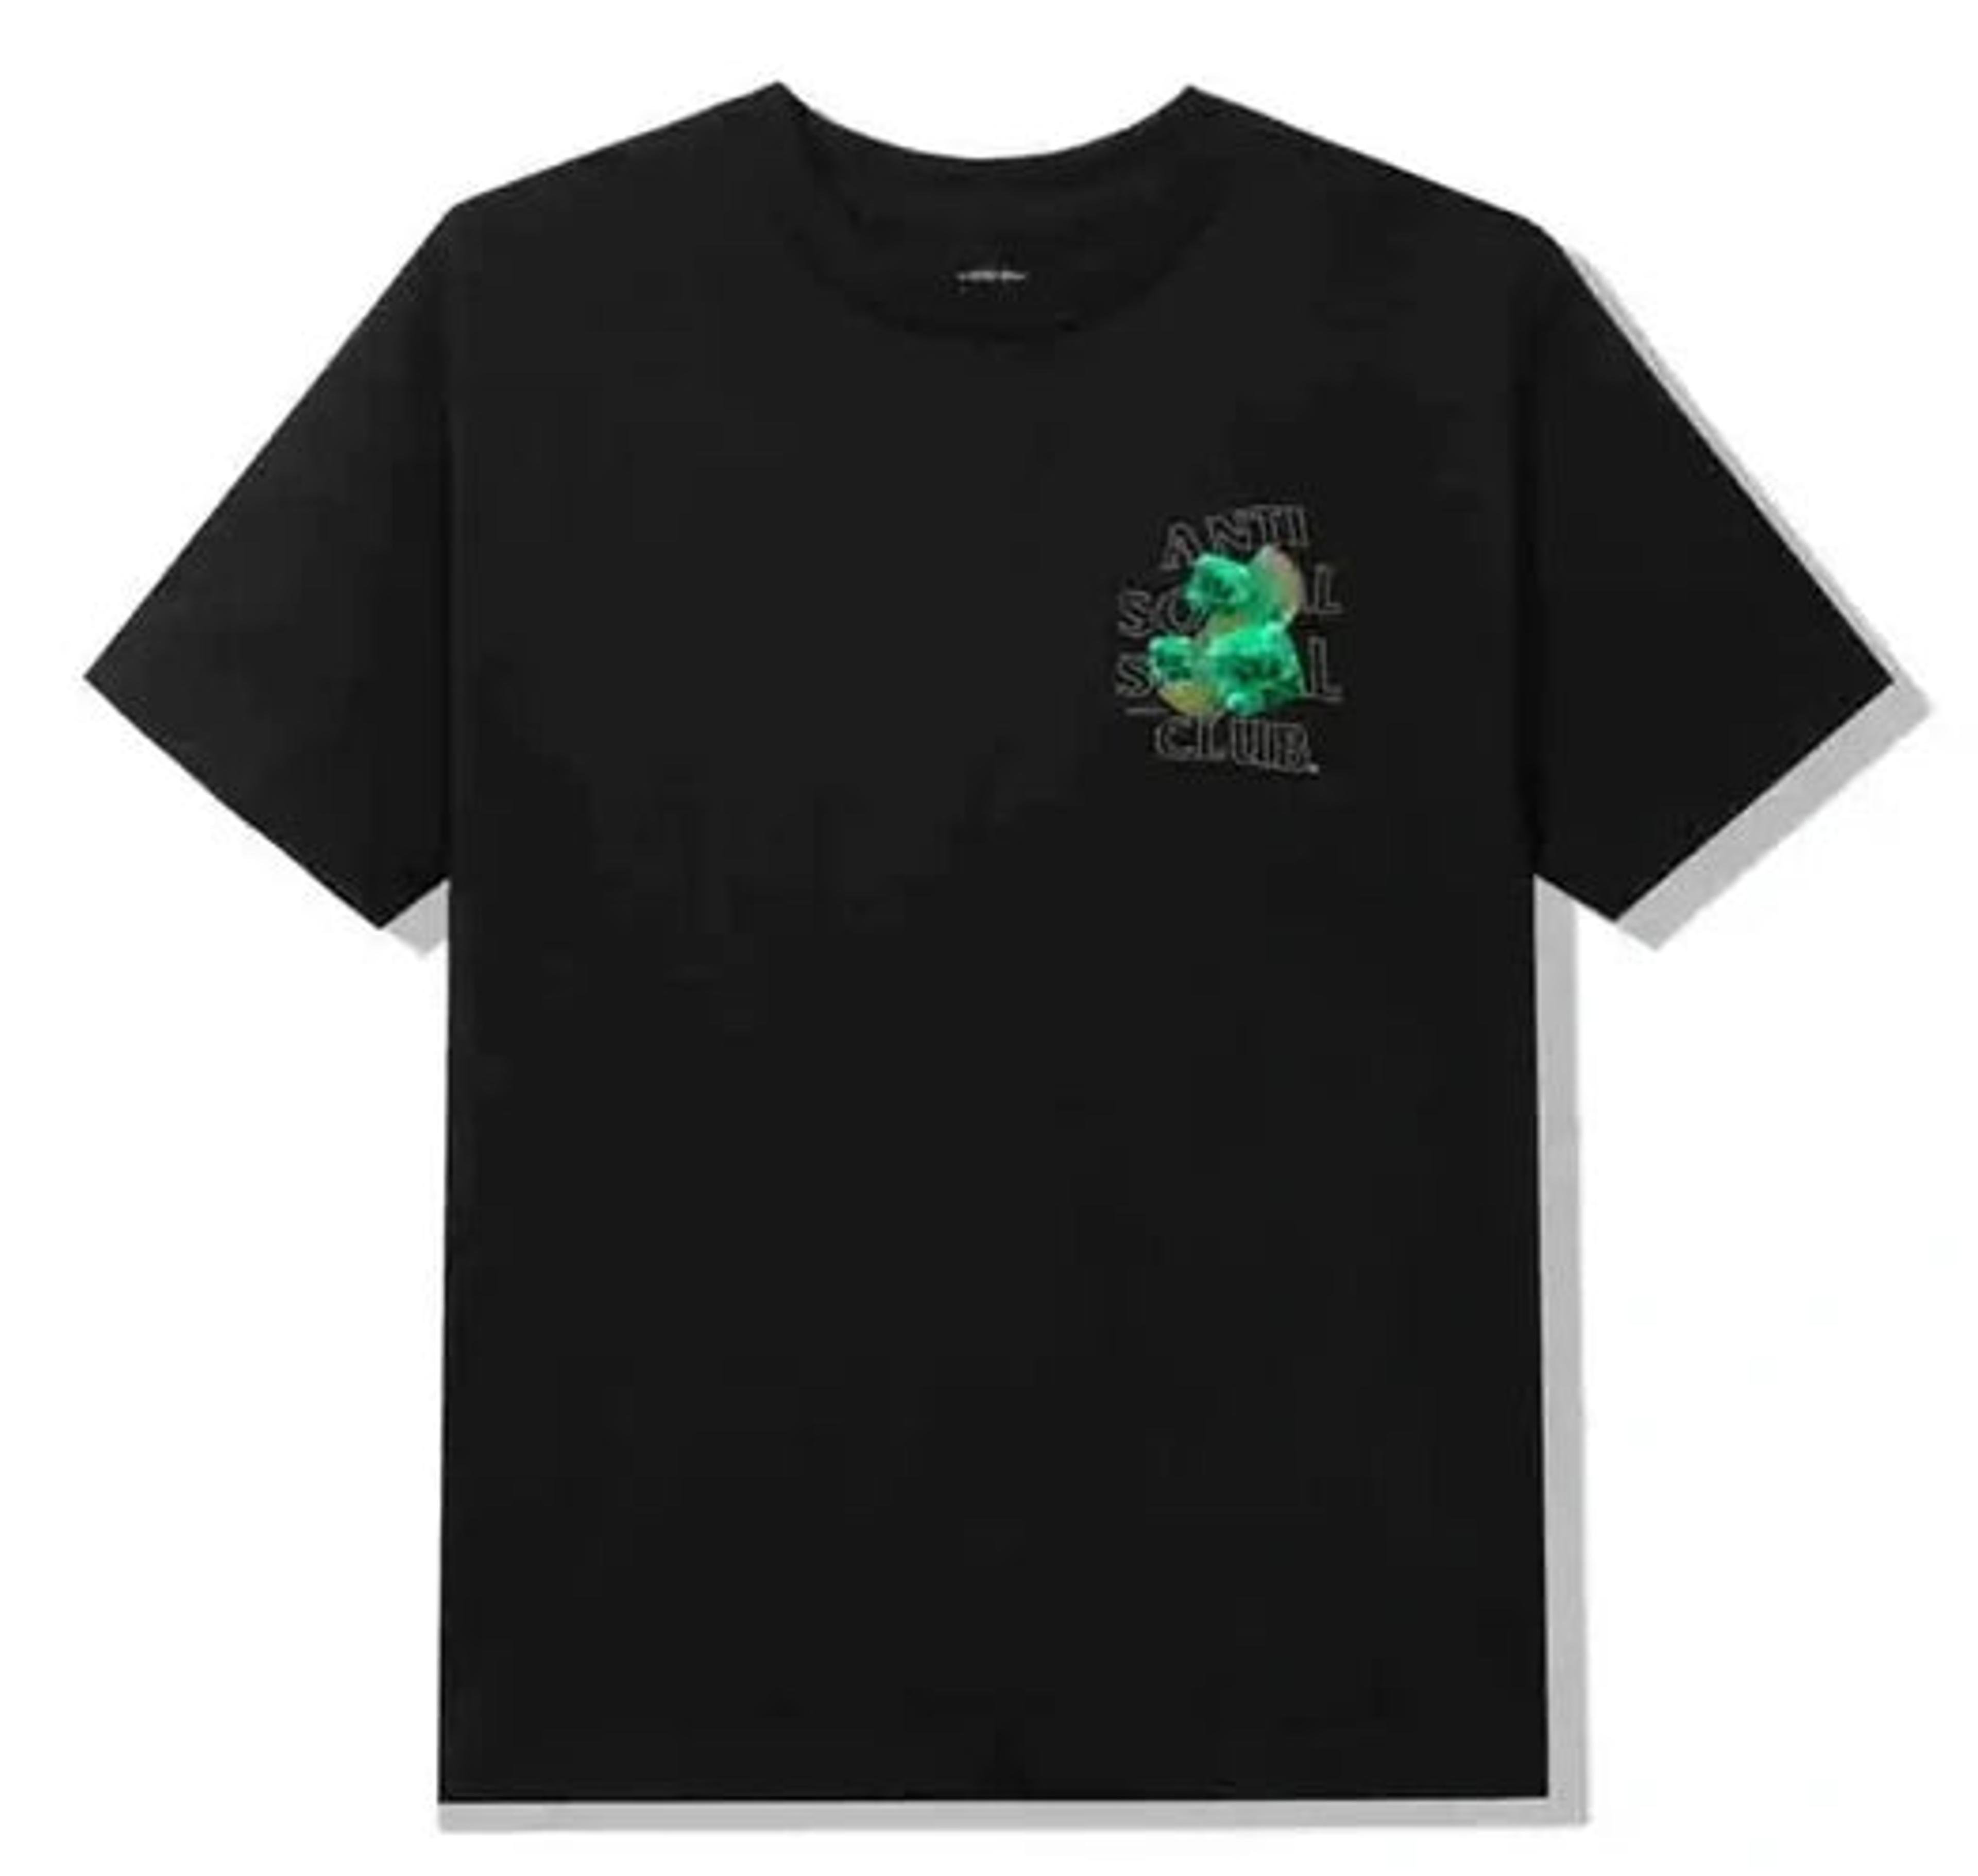 Alternate View 1 of Anti Social Social Club Bussin Black Tee ASSC DS Brand New